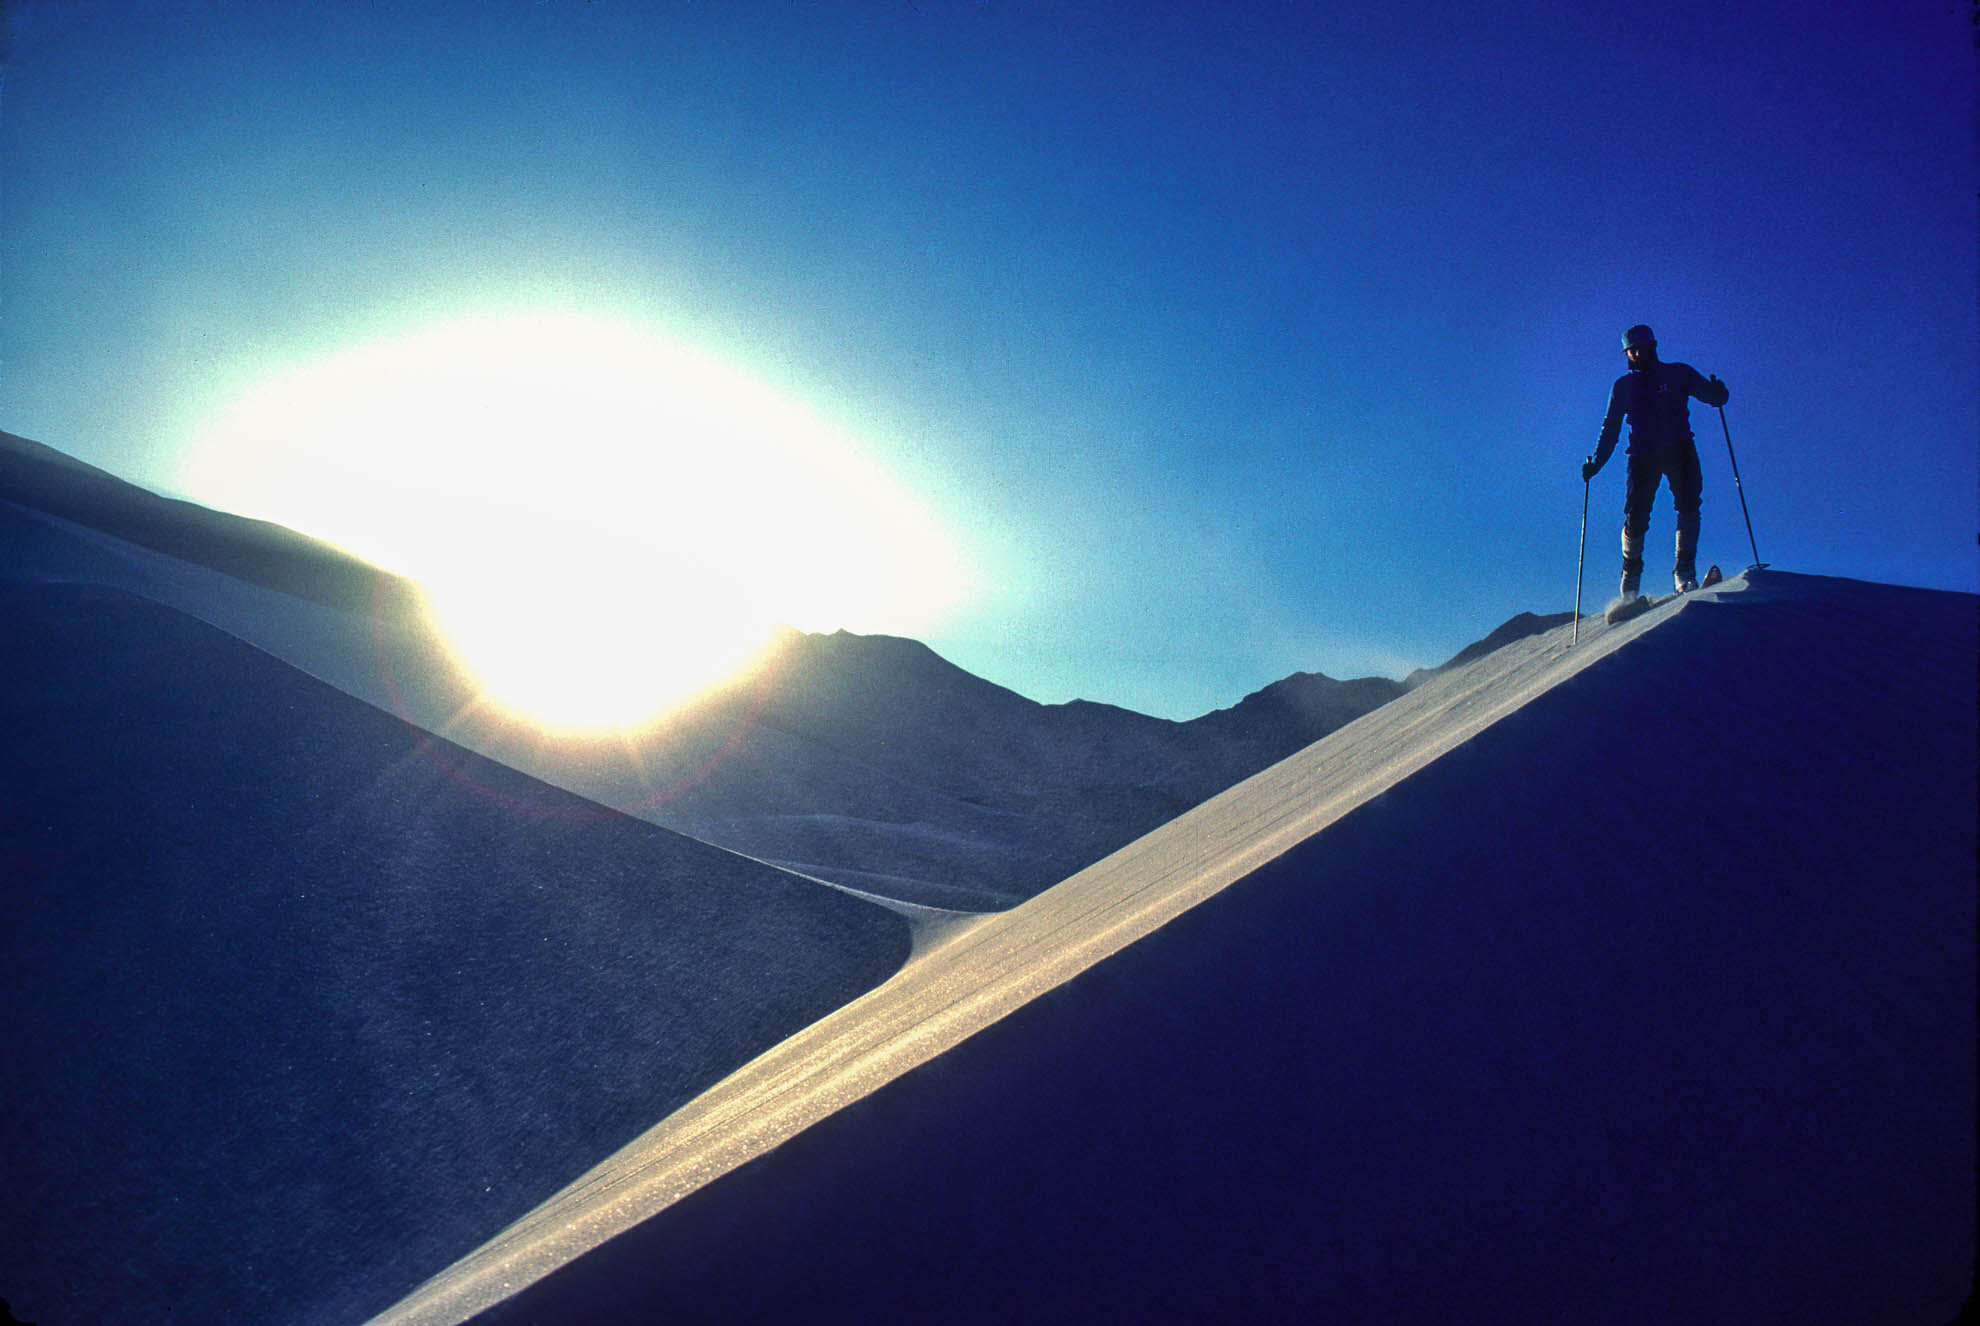  Lloyd Gallagher skis 300-metre high sand dunes, Chinese Pamir, 1981, during the Muztagata expedition. Photo by Pat Morrow. 